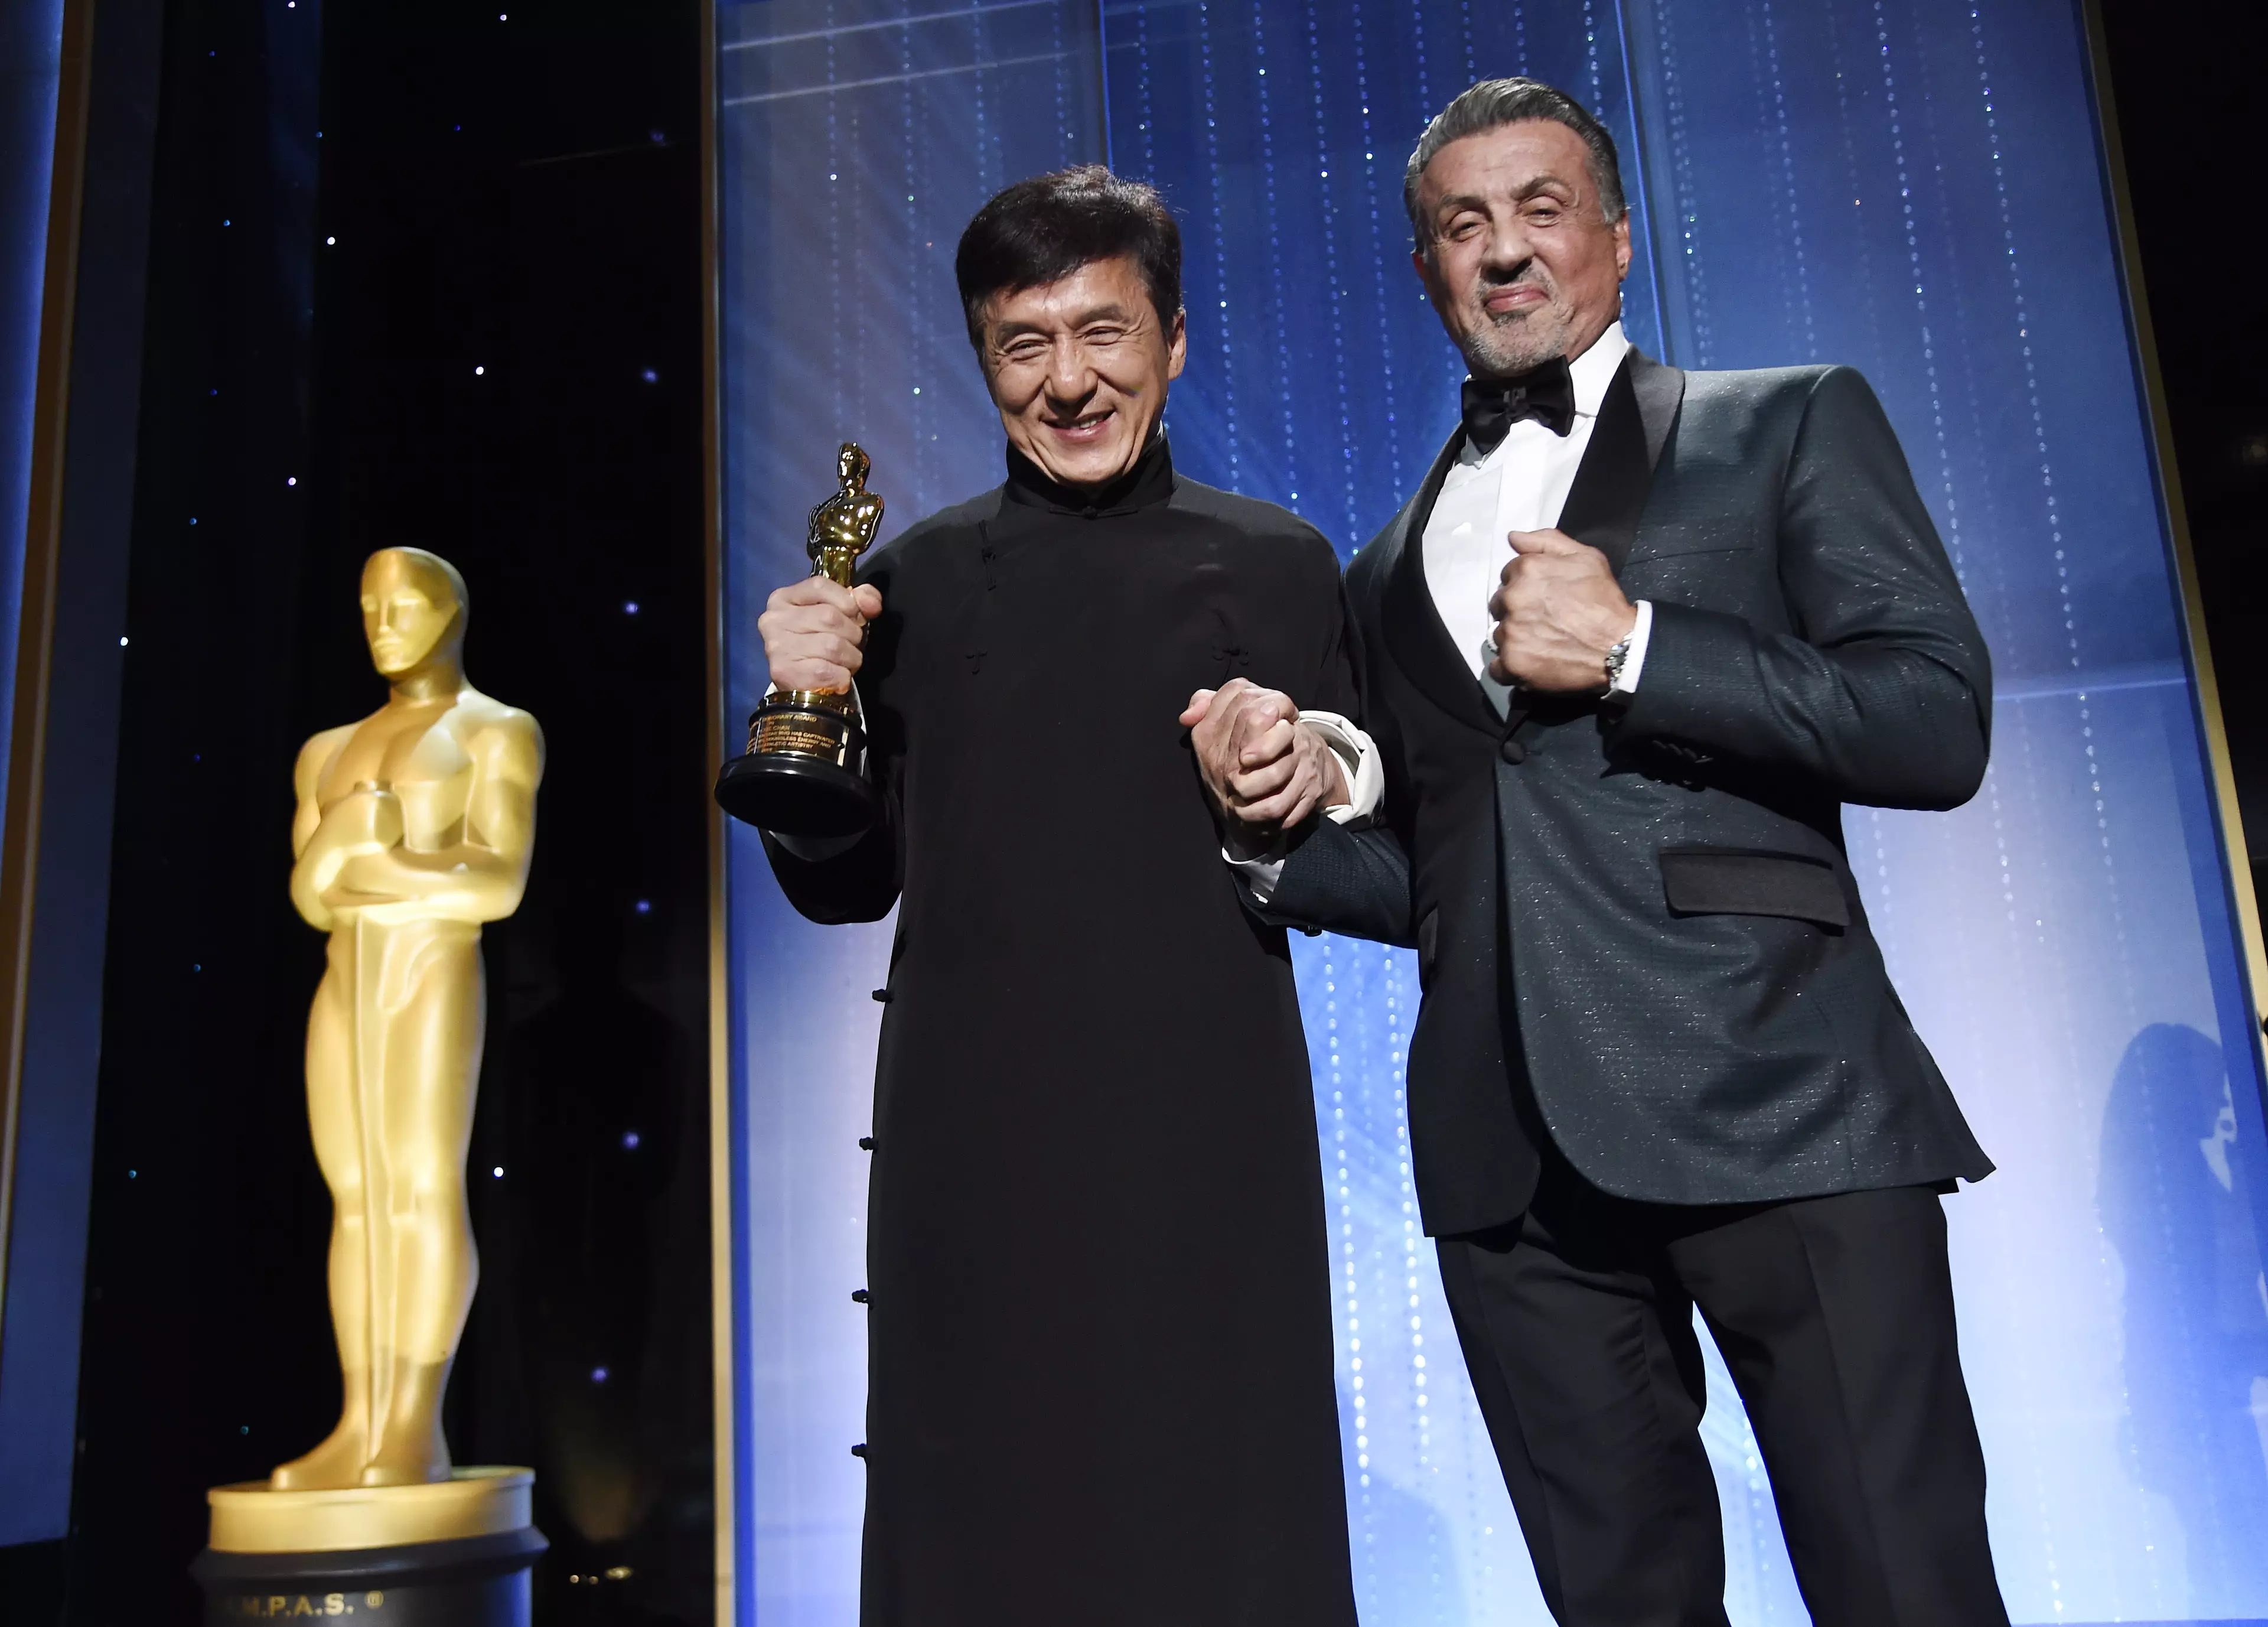 Jackie Chan Awarded With An Oscar After 56 Years In The Film Industry